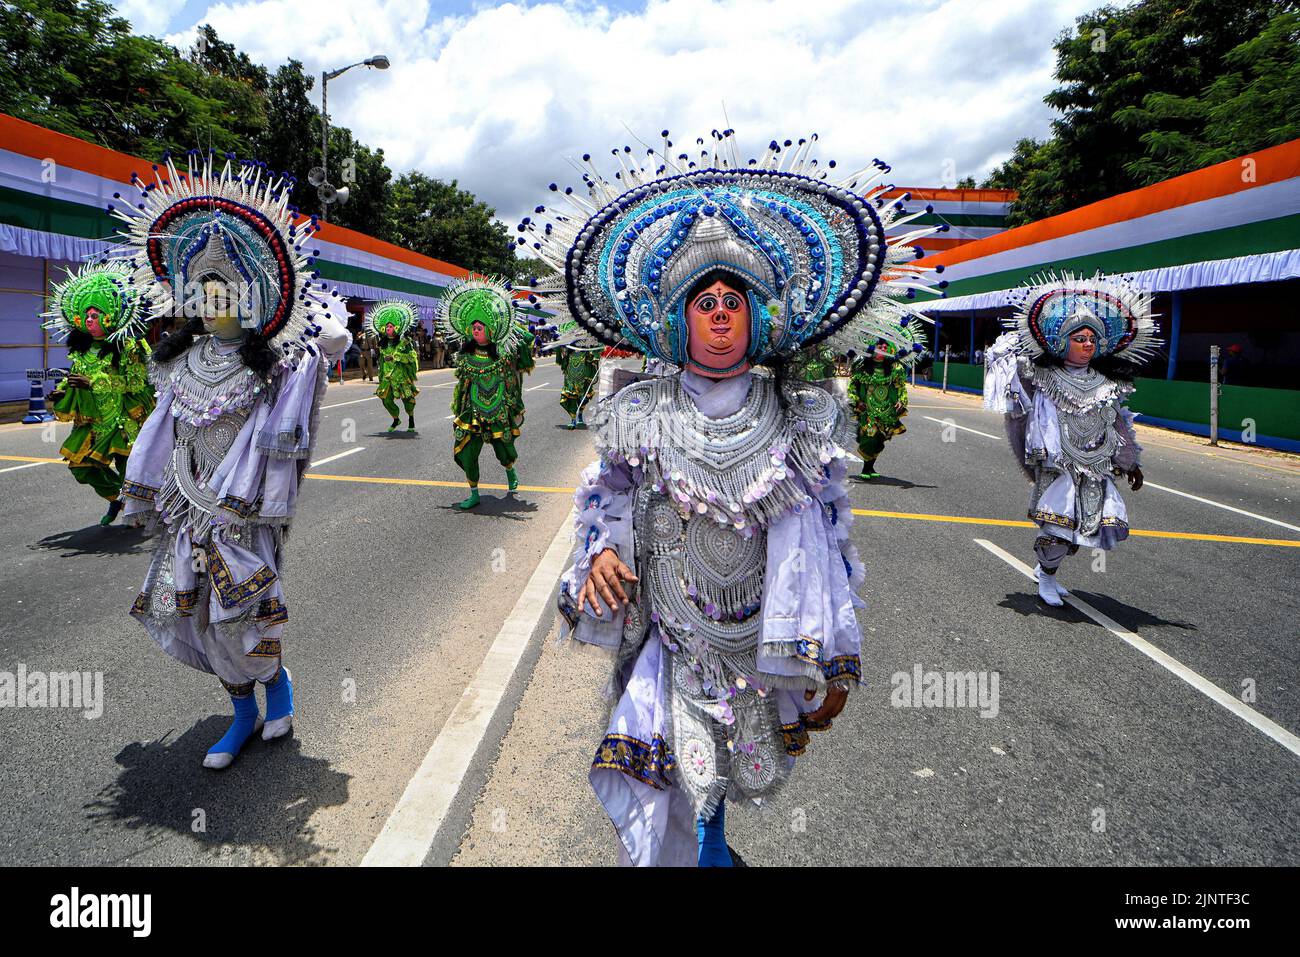 Folk Artist of Purulia (Chhau dancers) seen walking on red road during the Independence day Final Dress Rehearsal. India prepares to celebrate the 75th Independence day on 15th August 2022 as part of the Azadi Ka Amrit Mahotsav celebration. Stock Photo